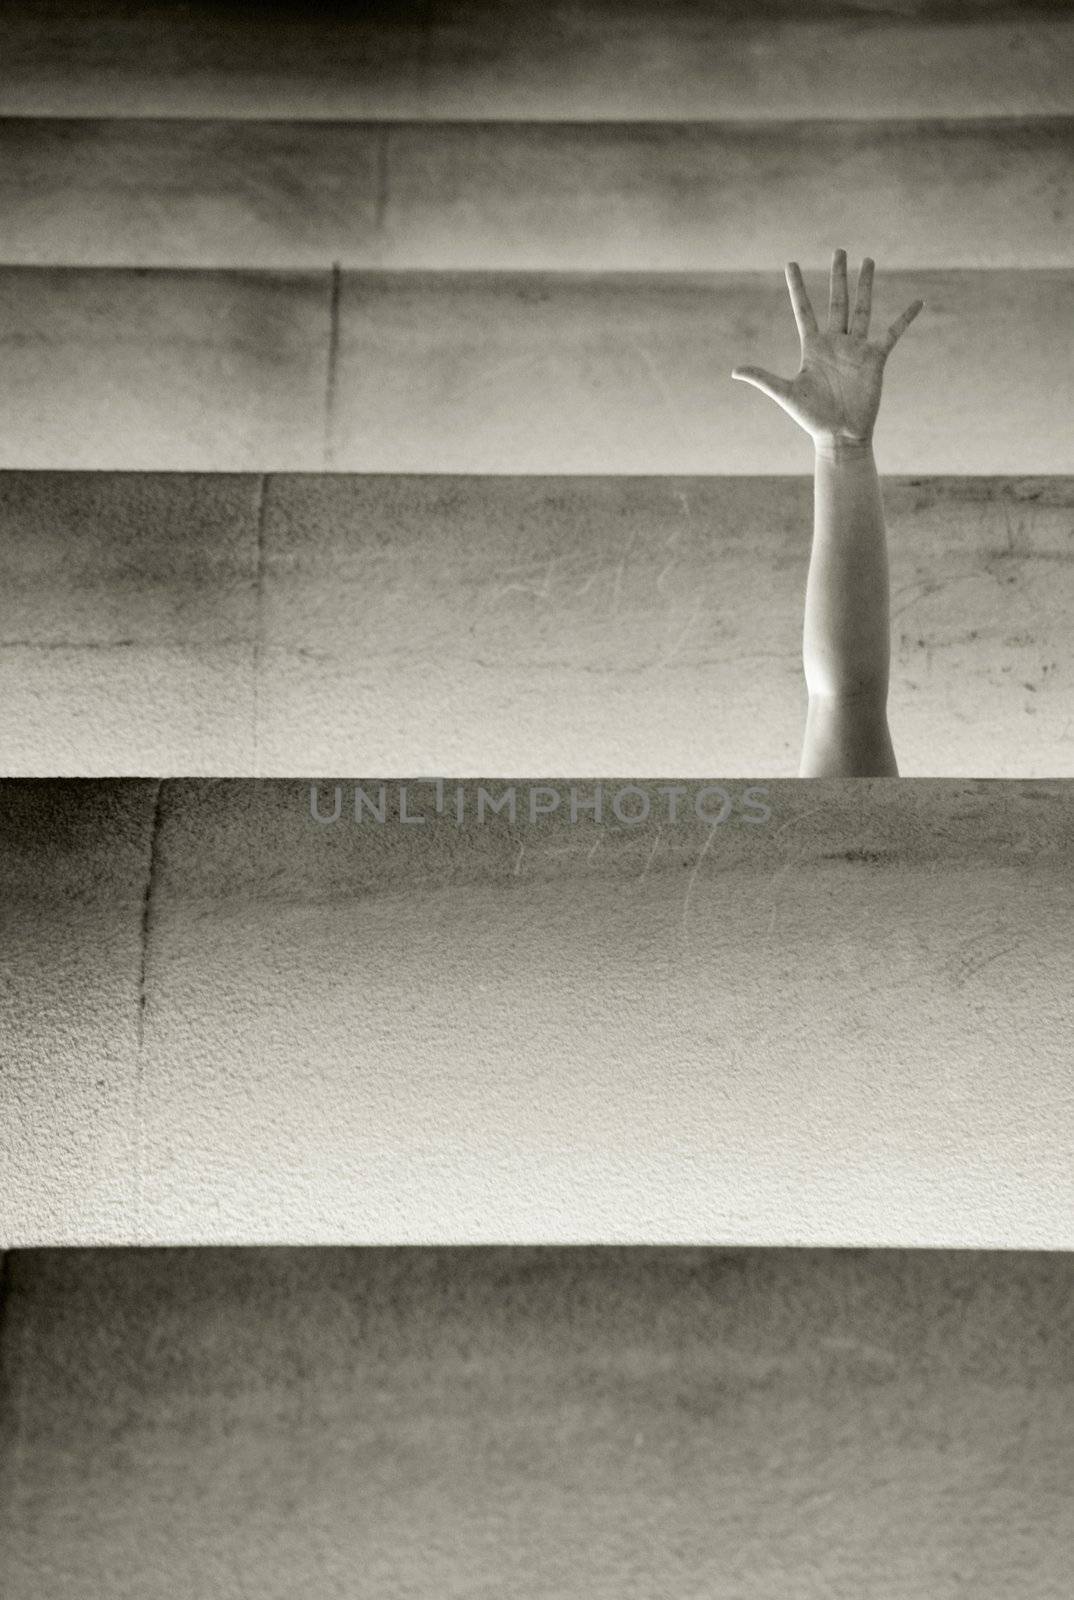 petitionary hand gesture showing drowing in justice pillars, selective focus on hand